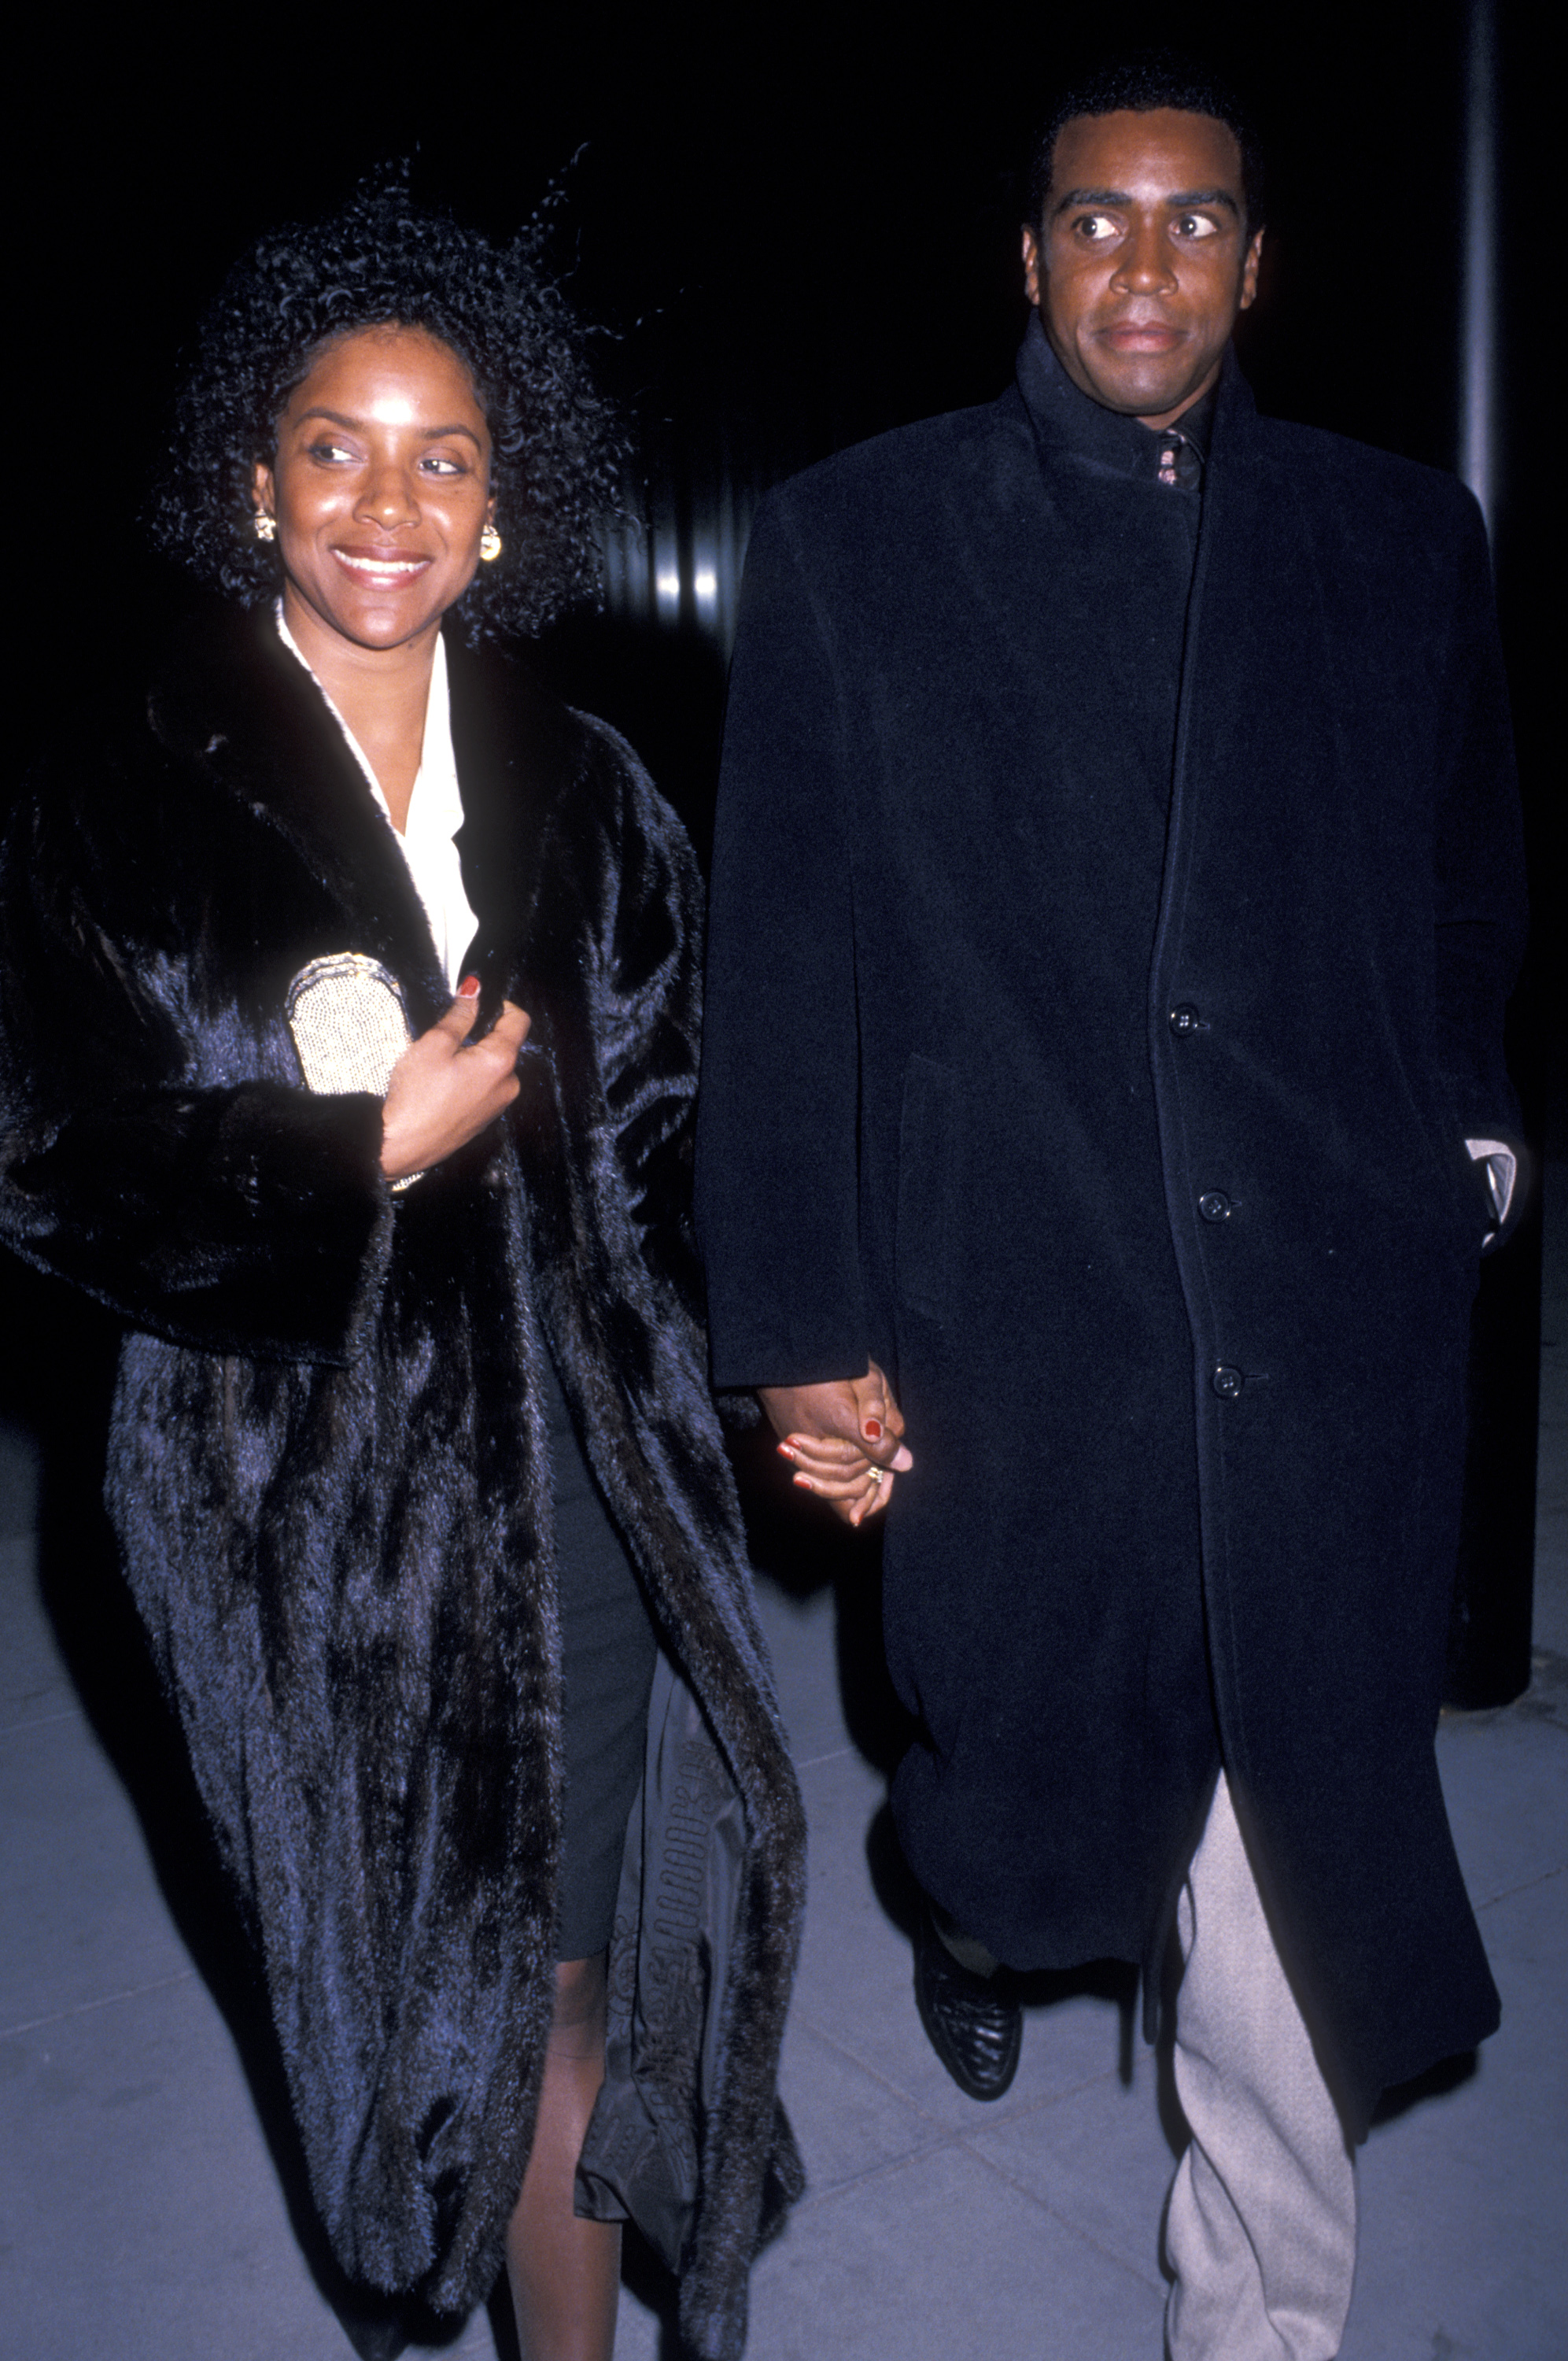 Phylicia Rashad and Ahmad Rashad attend the premiere of "Tap" on February 6, 1989, at the Ziegfeld Theater in New York City, New York. | Source: Getty Images